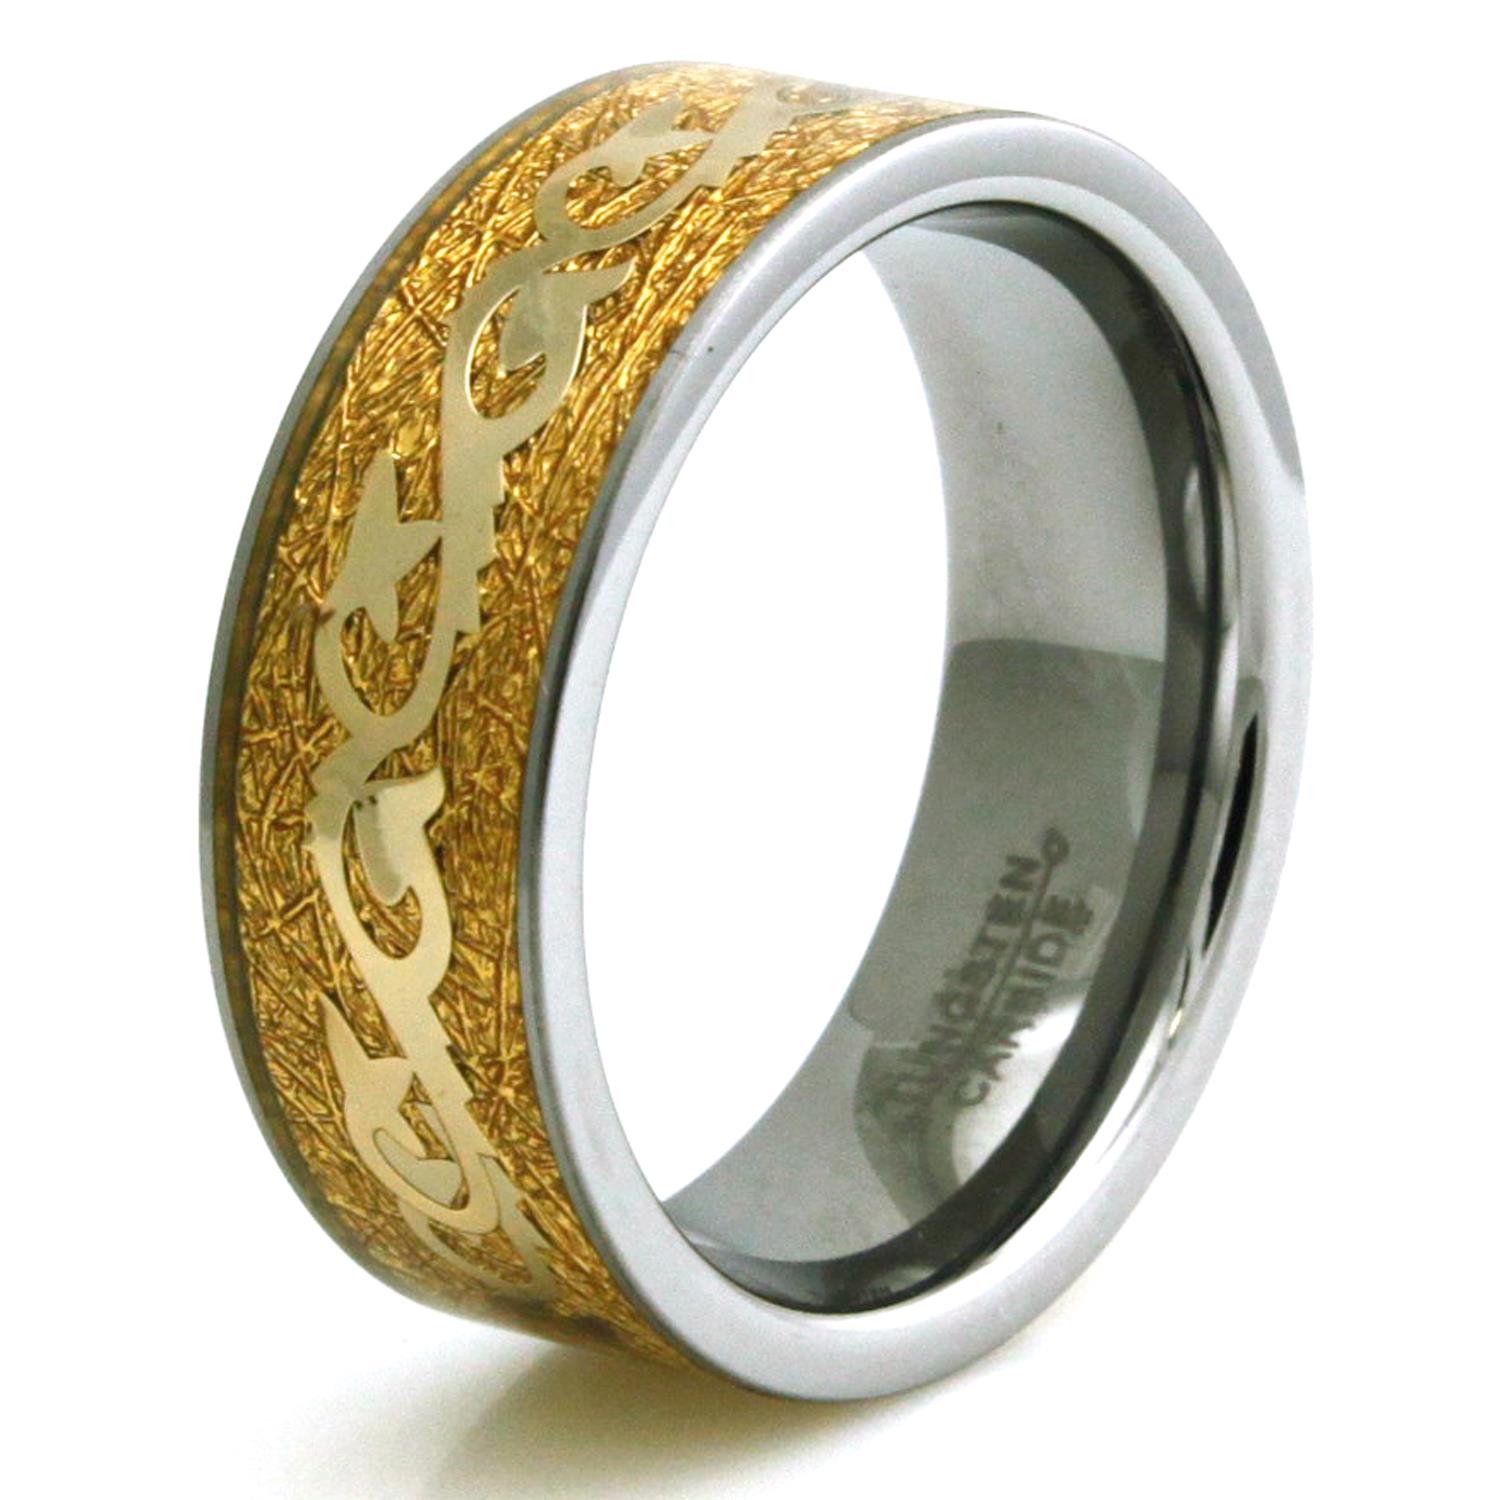 Tioneer R15561 100 Tungsten Men's Ring & Gold Foiled Band and Filigree Inlay